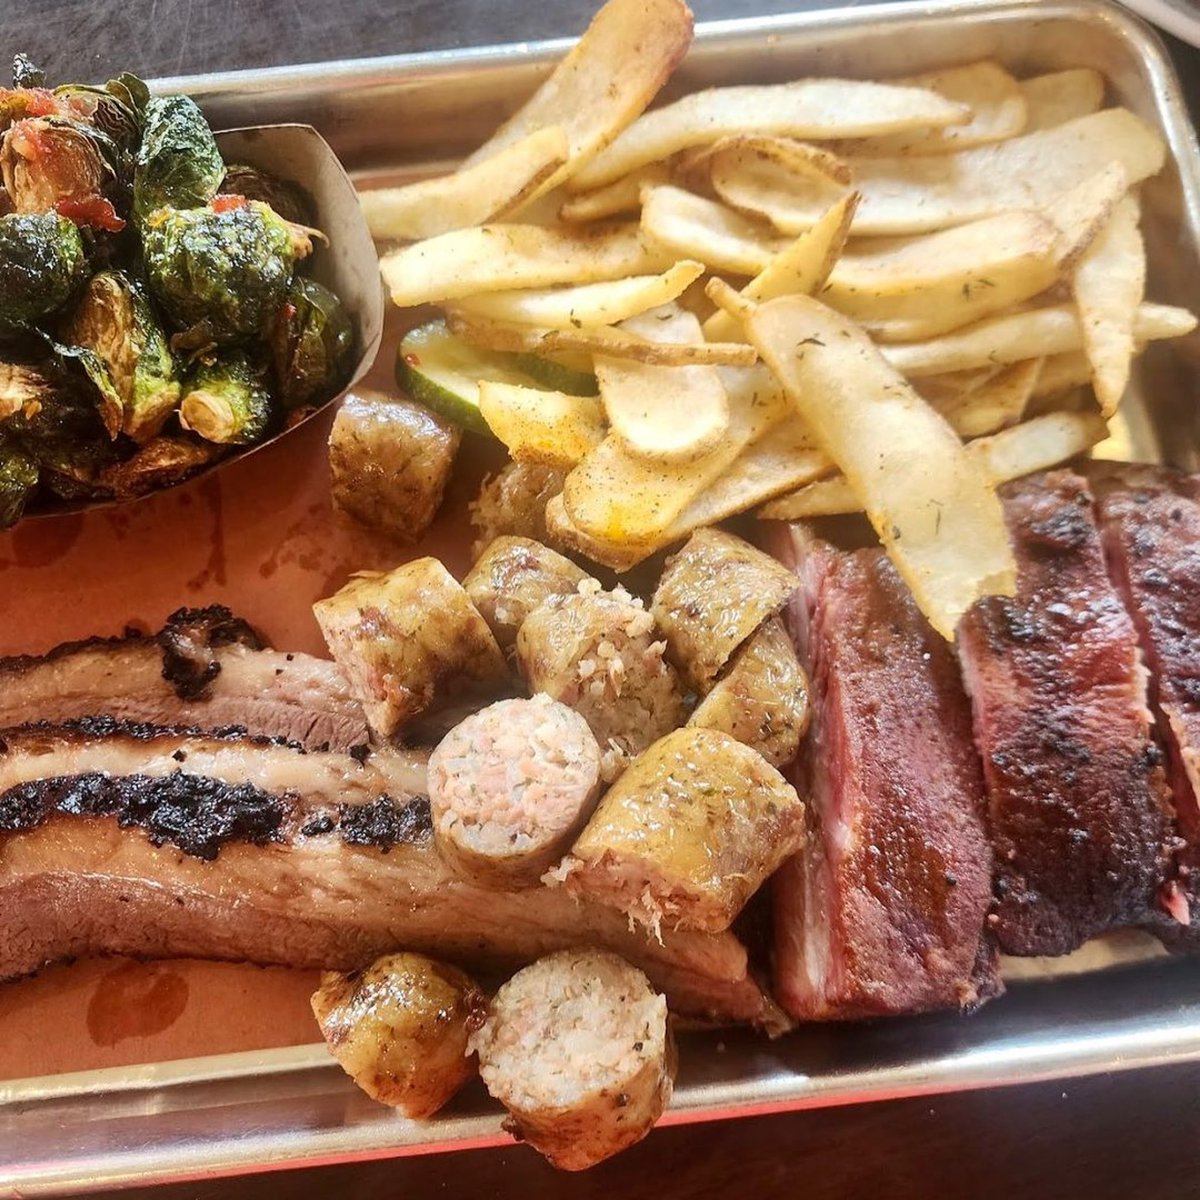 Get like Ann L. and get some award-winning  CCBBQ in that belly today! 

“⭐️⭐️⭐️⭐️⭐️ The boudin was delicious 😋 My favorite is the brussel sprouts. The service is great and the place is always clean.
Food 5️⃣
Service 5️⃣
Atmosphere 5️⃣”

#wherenolaeats #noladining